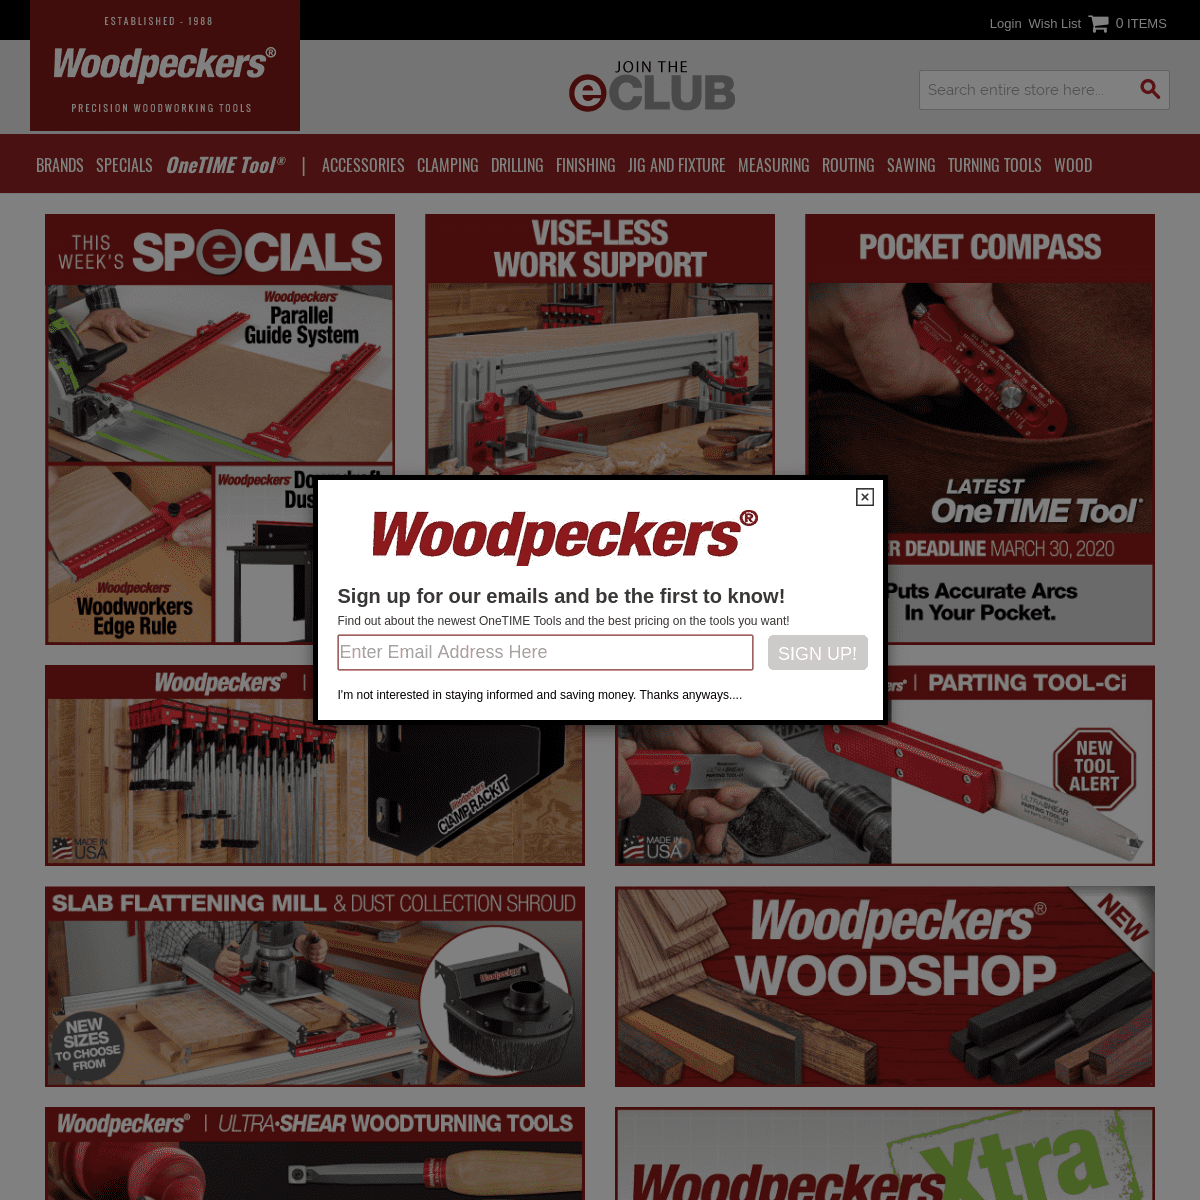 A complete backup of woodpeck.com